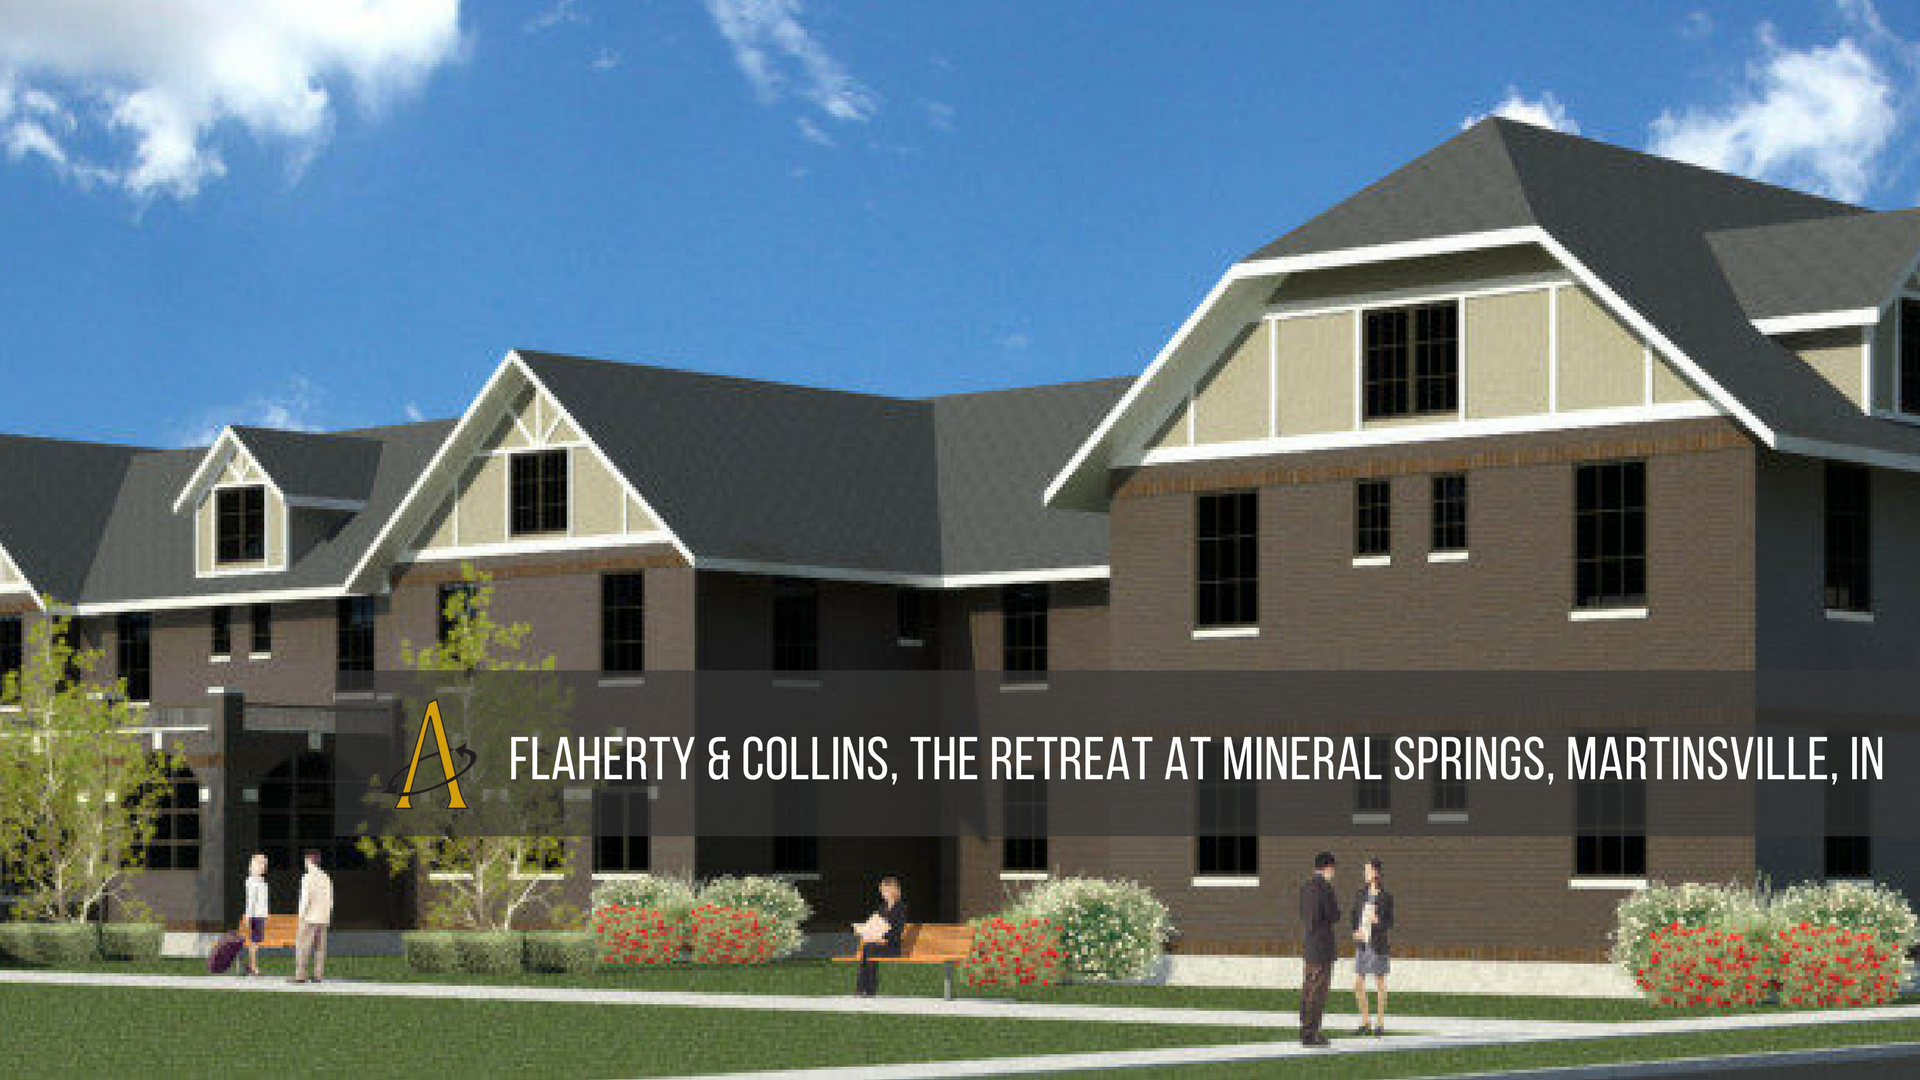 Flaherty & Collins, The Retreat at Mineral Springs, Martinsville, IN